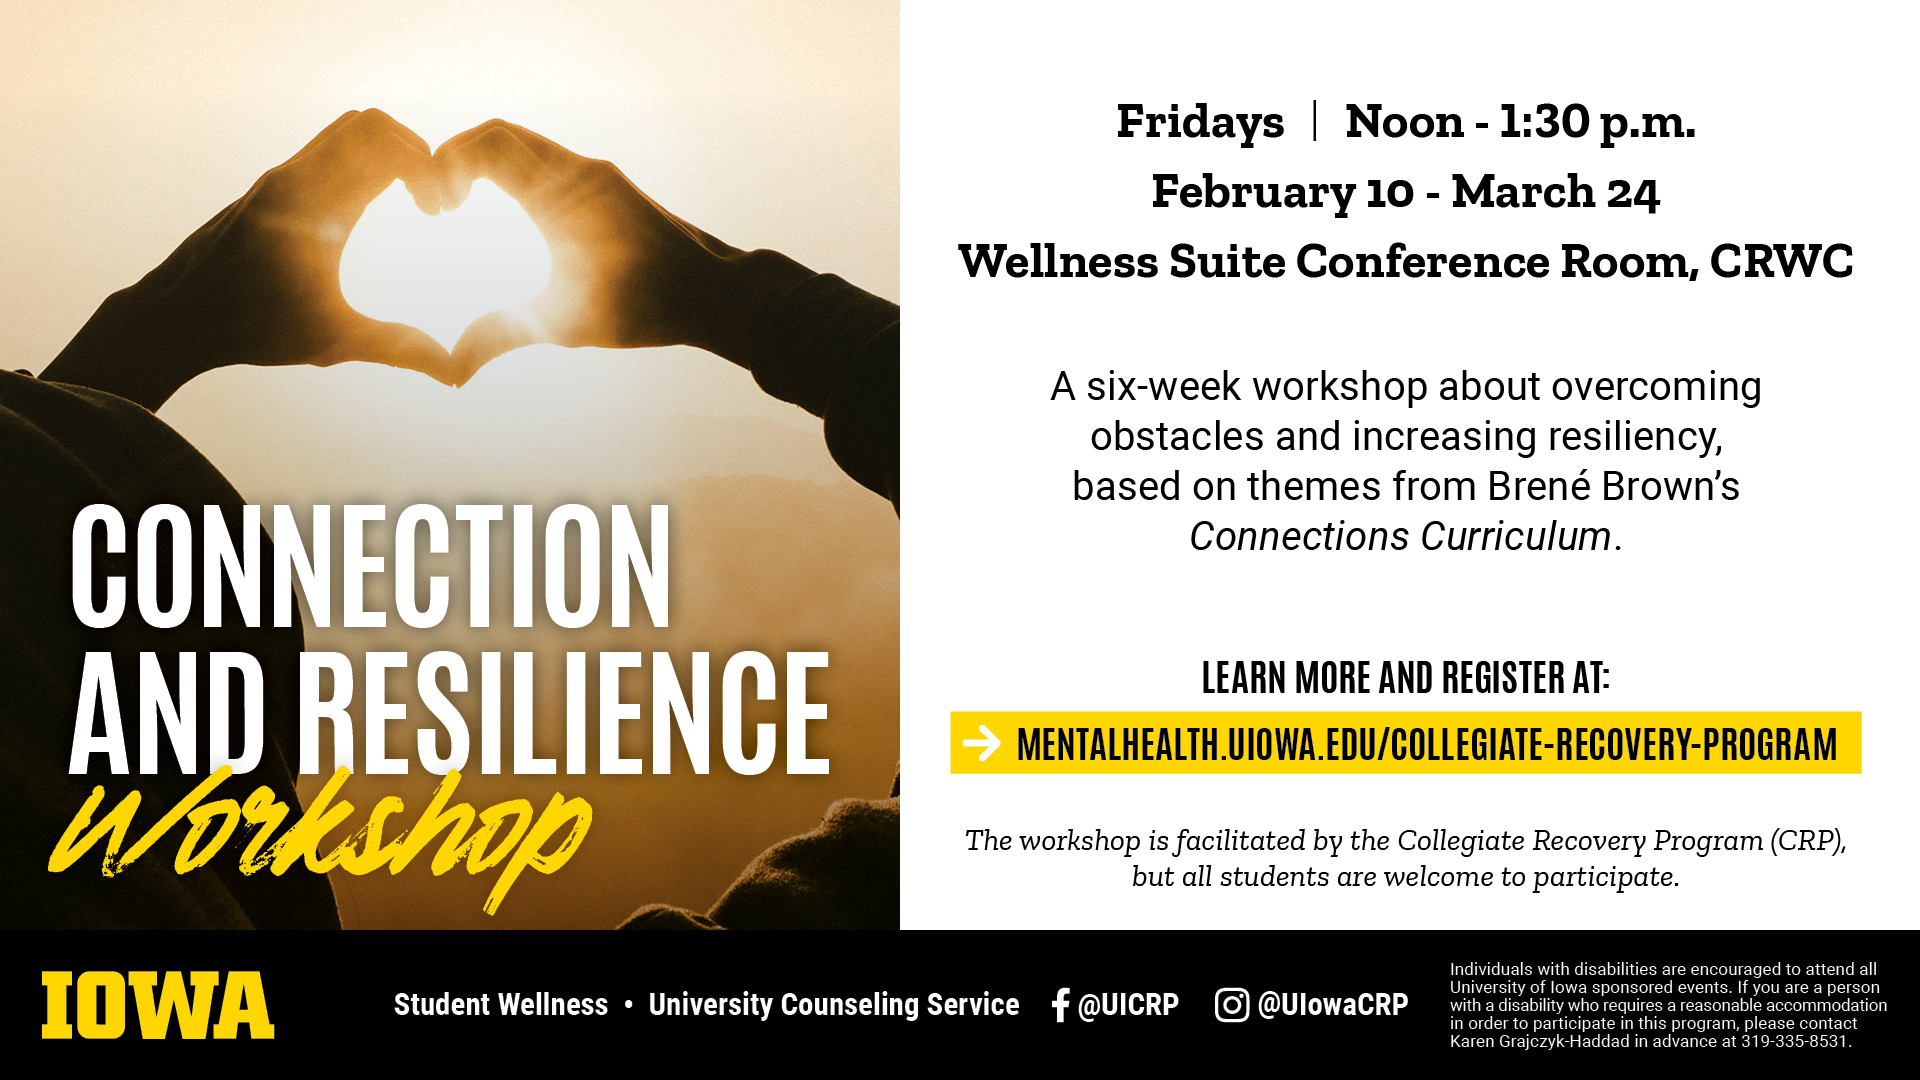 Connection and Resiliance Workshop Fridays Noon-1:30pm. February 10th-March 24th at the CRWC